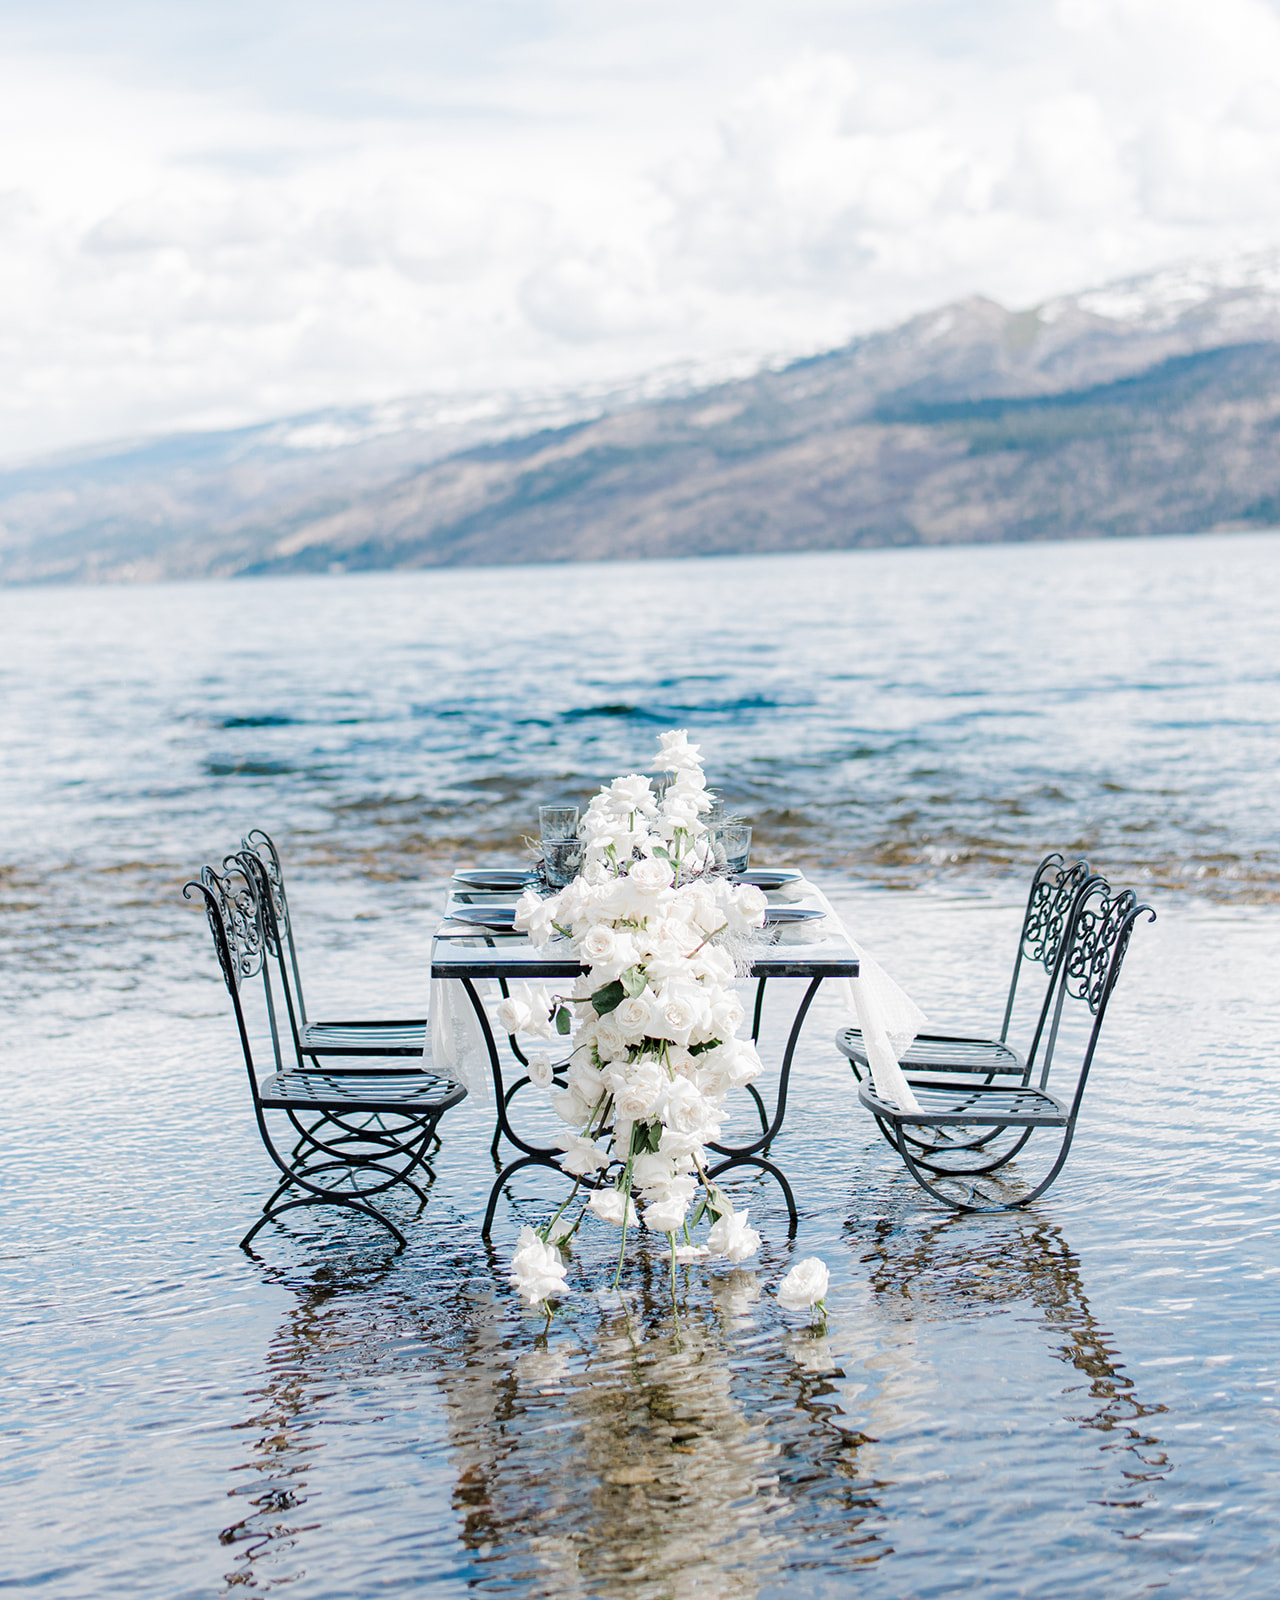 Intimate table setting outdoors in Peachland, BC, coastal chic wedding inspiration with the majestic backdrop of the Canadian Rockies. Tablescape adorned with stunning florals by JAM Florals.